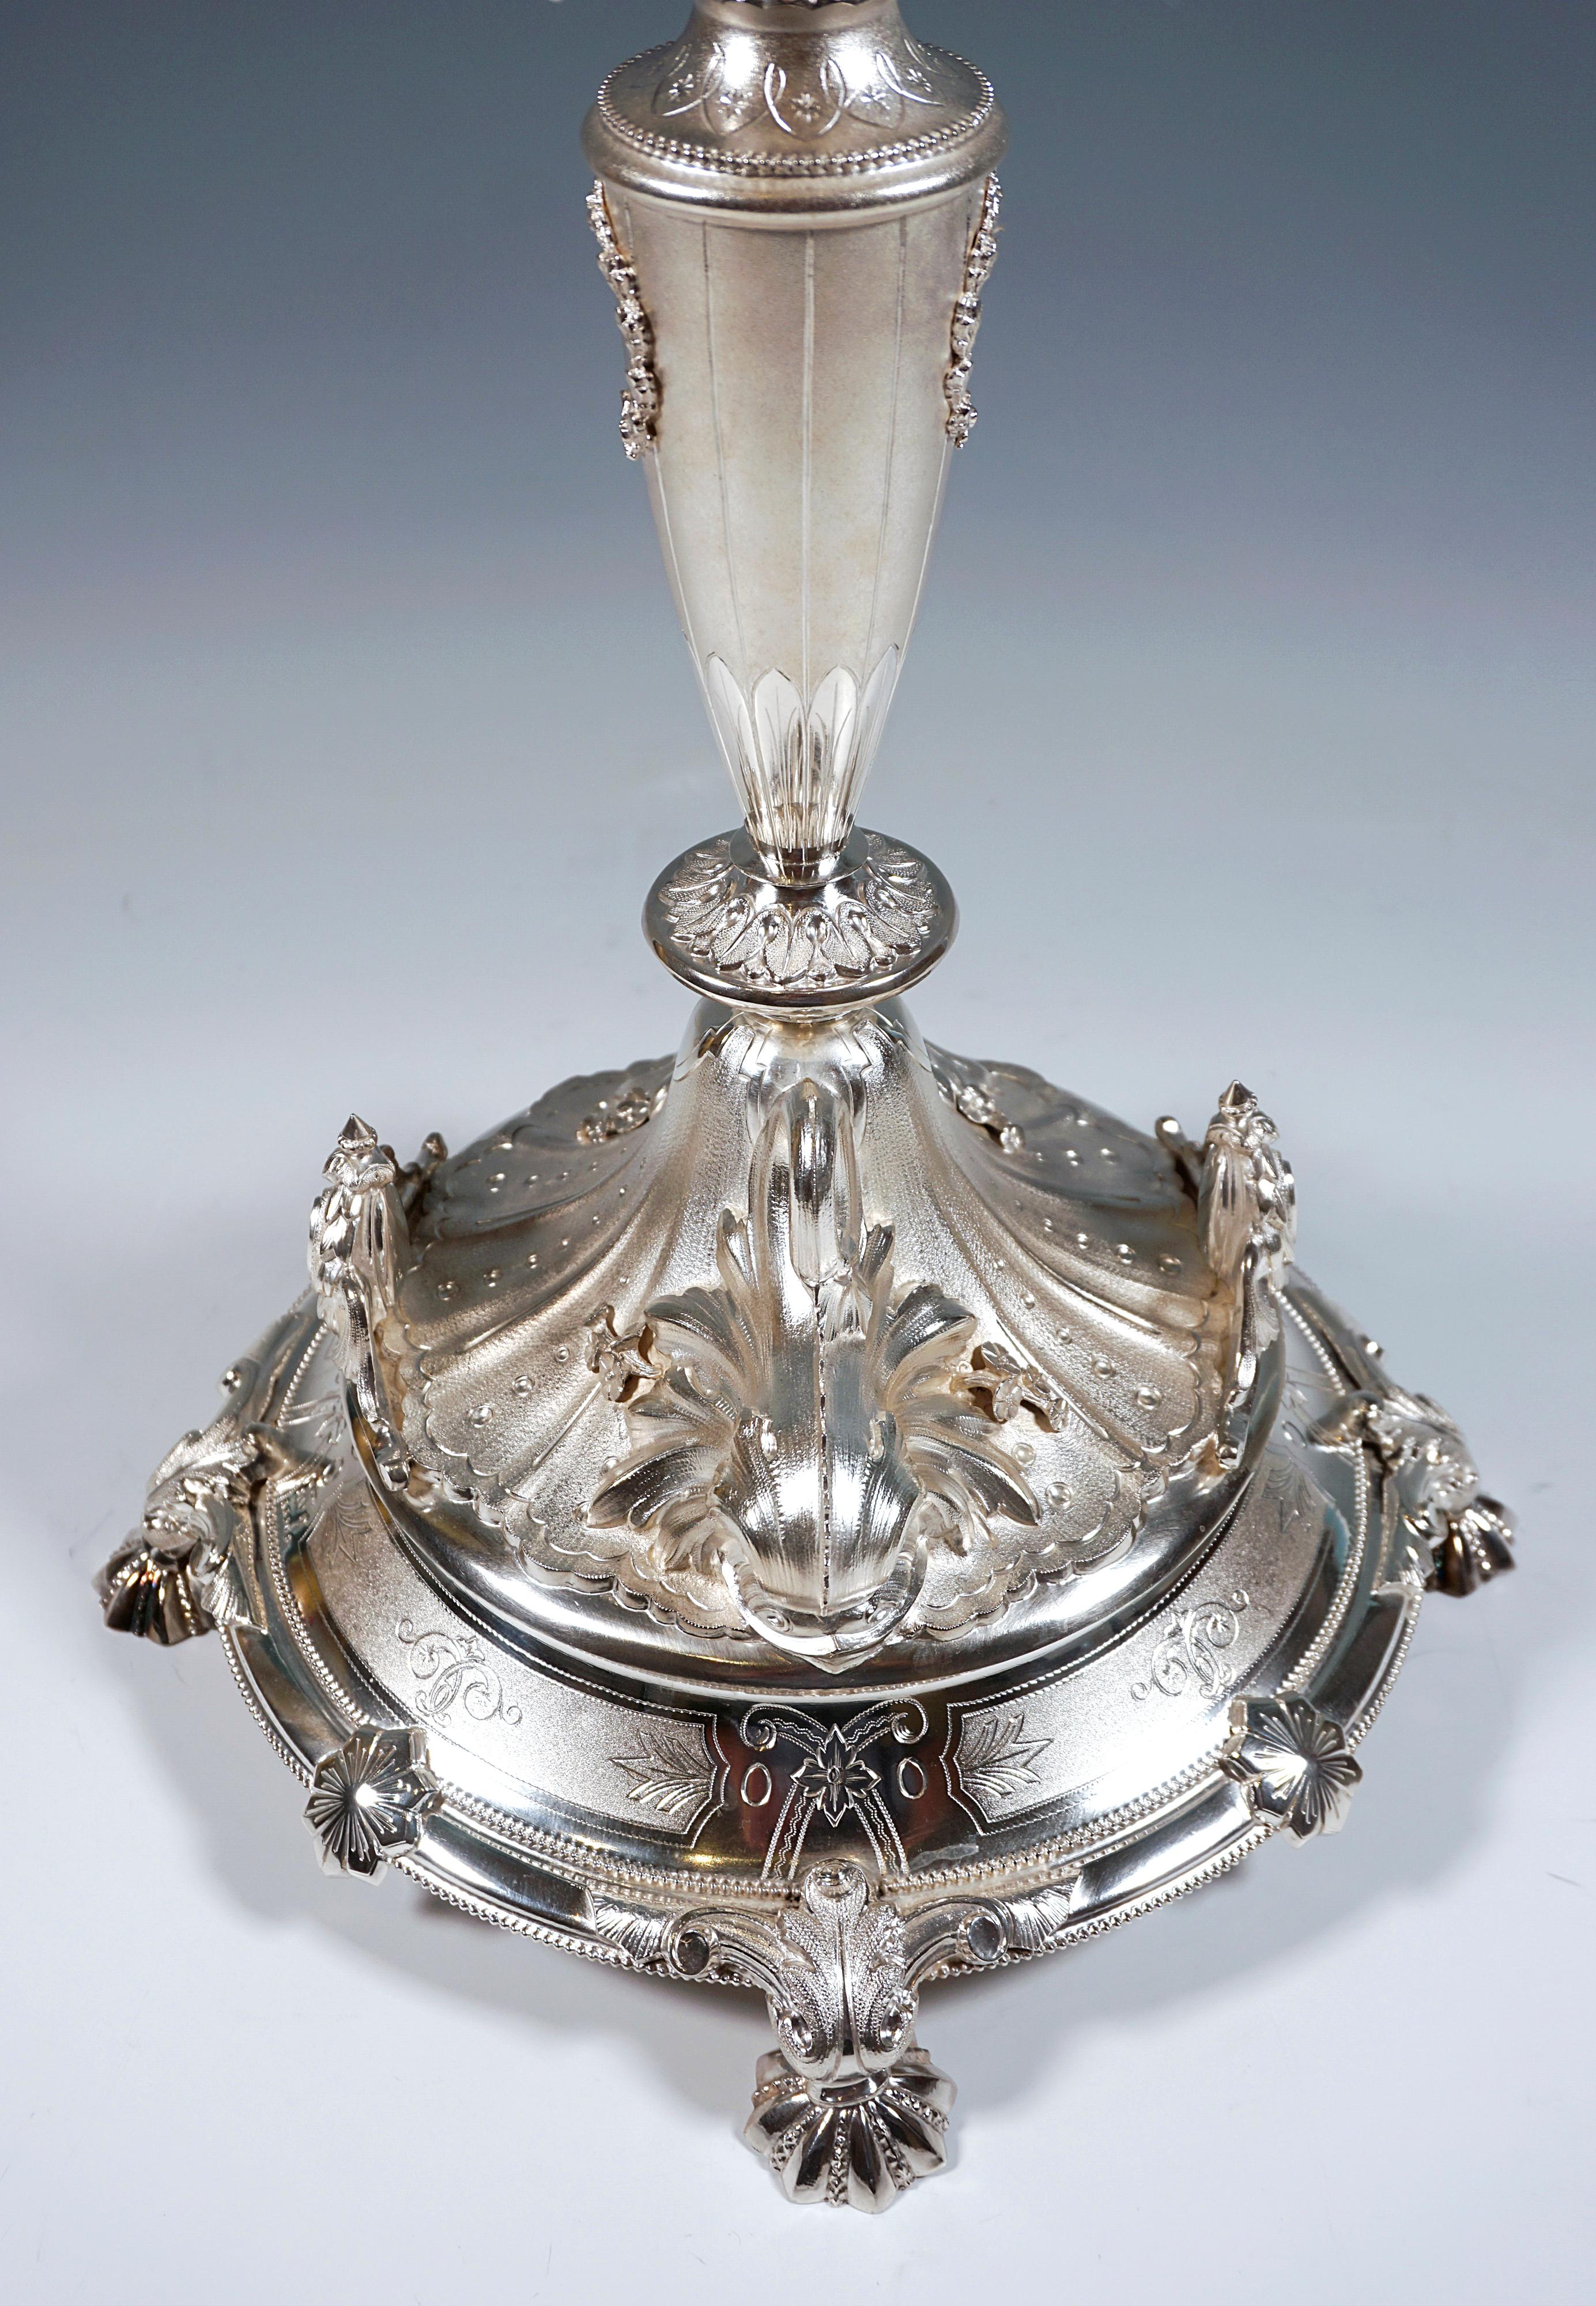 Late 19th Century Pair Of 7-Flame Silver Candelabras With Dolphins, Wilkens & Sons Germany, 1877